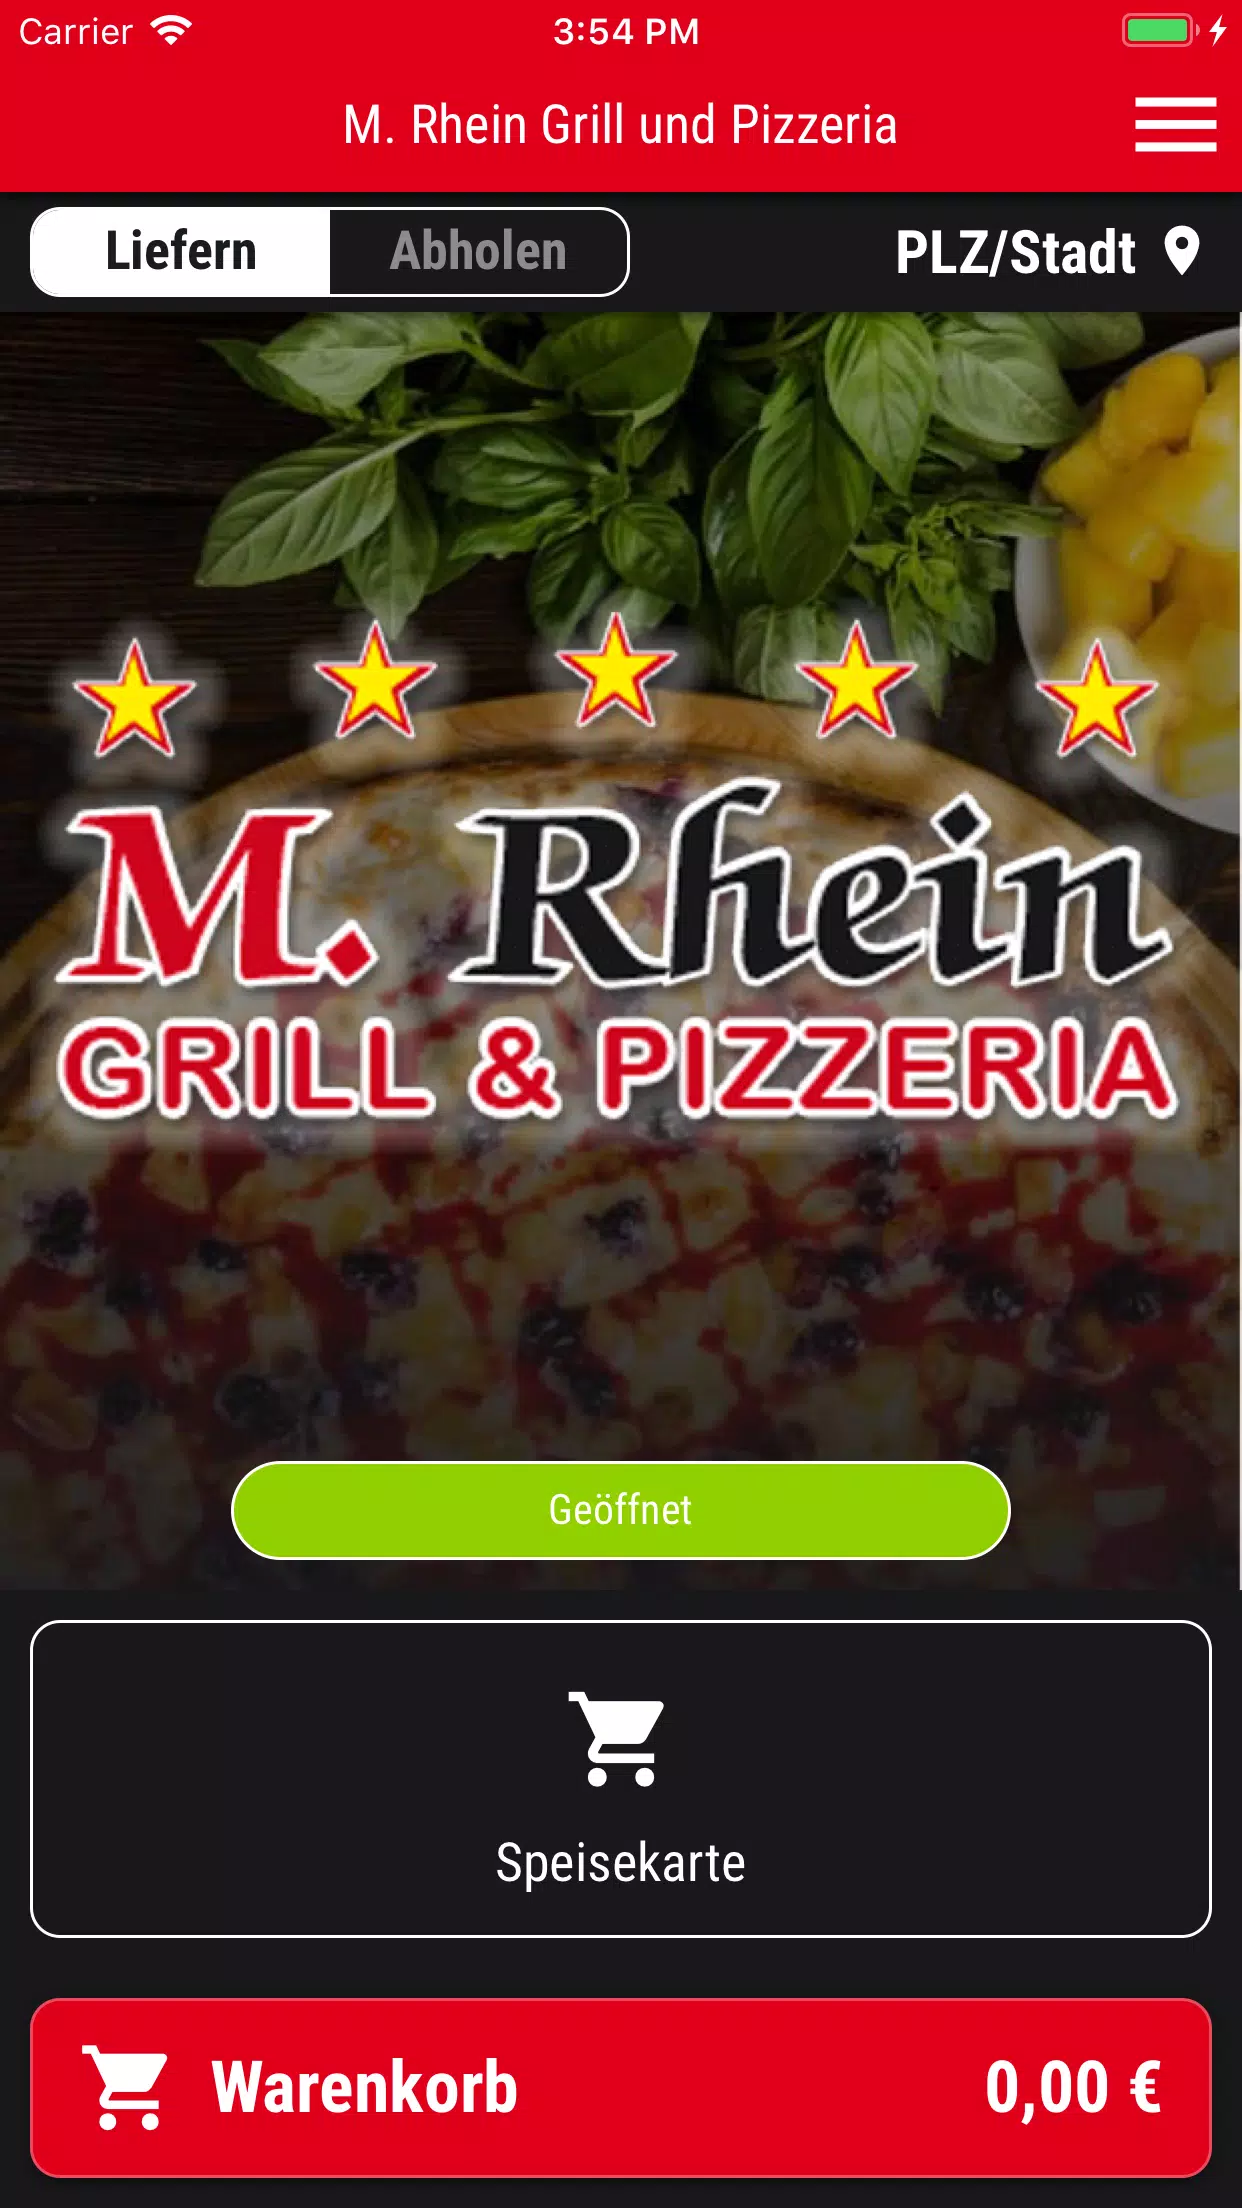 M. Rhein Grill & Pizzeria for Android - APK Download